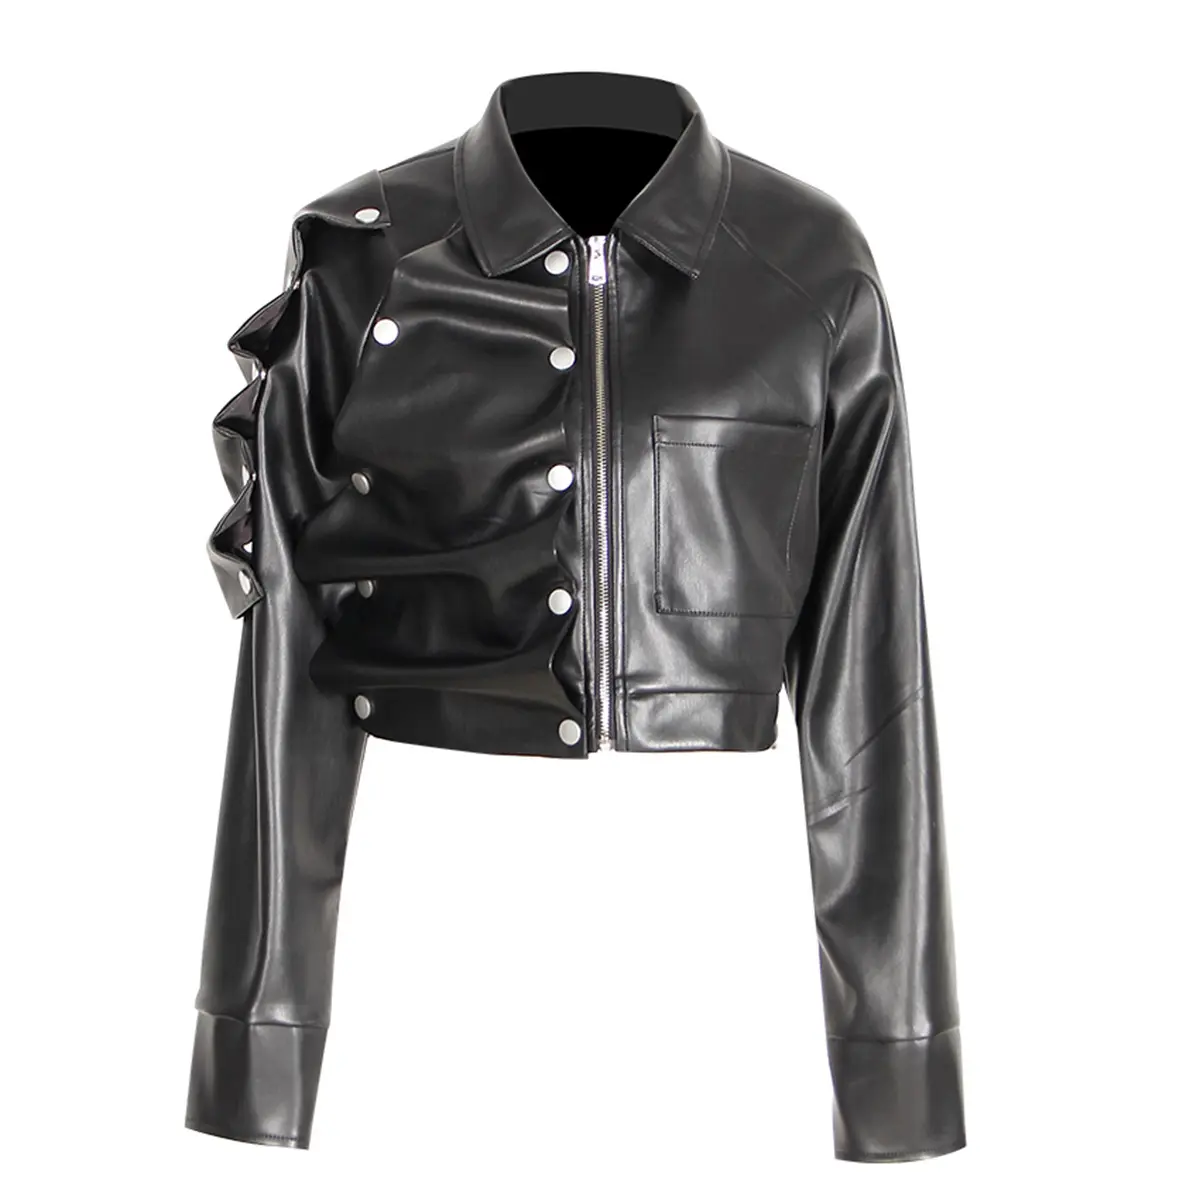 High Quality Sheepskin Girls Leather Jacket Can Custom Different Types Of Jacket Fabric Material With Custom Design